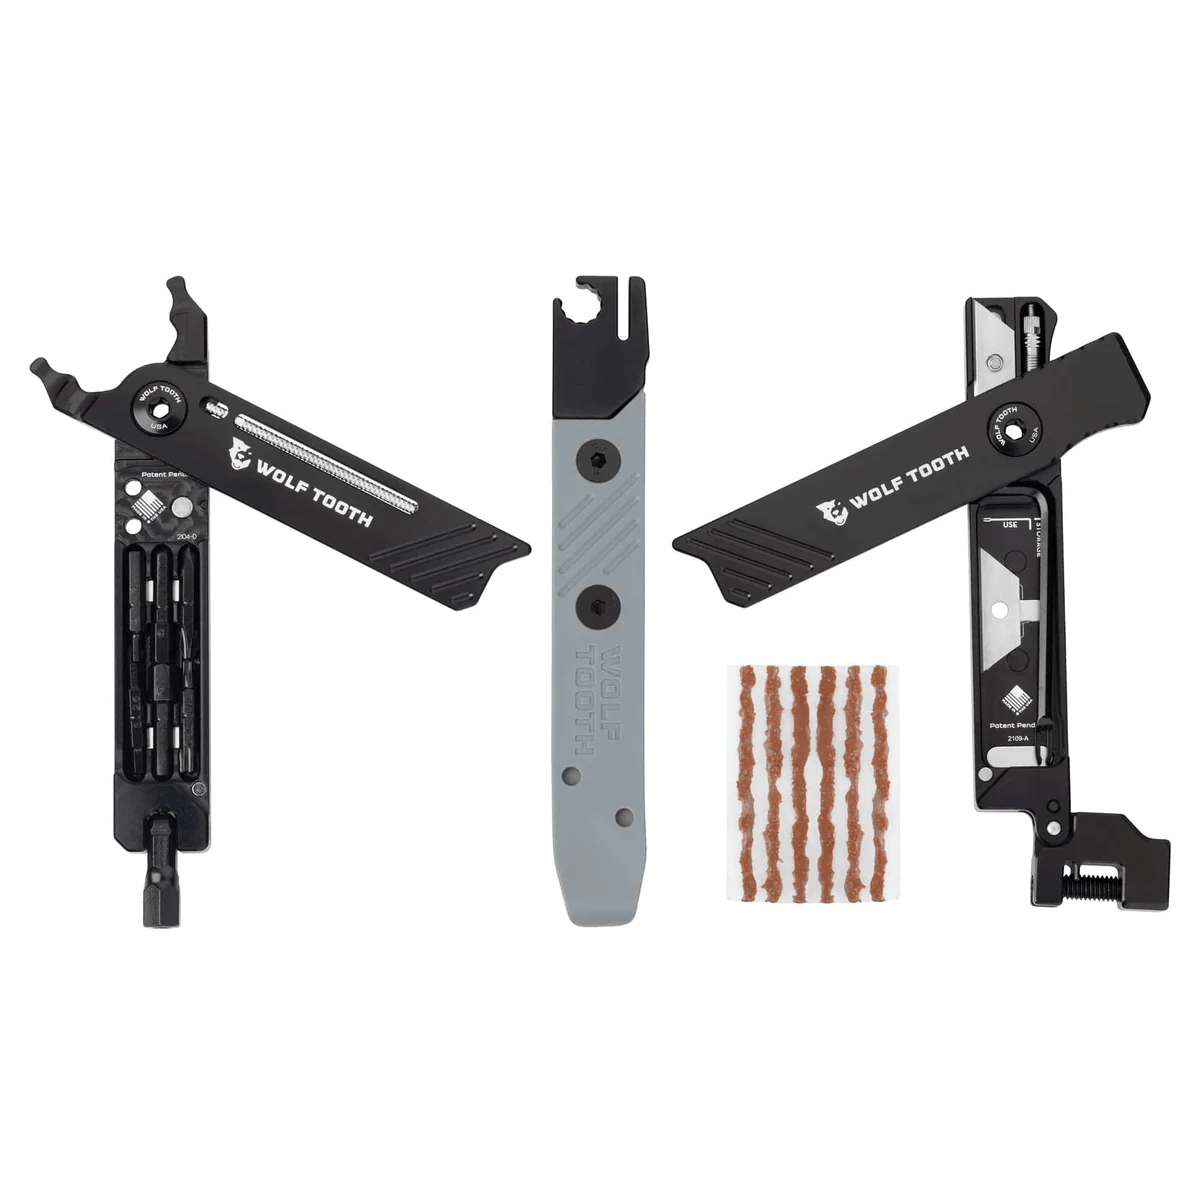 Wolf Tooth Components 8-Bit Kit Two Accessories - Tools - Multi-Tools